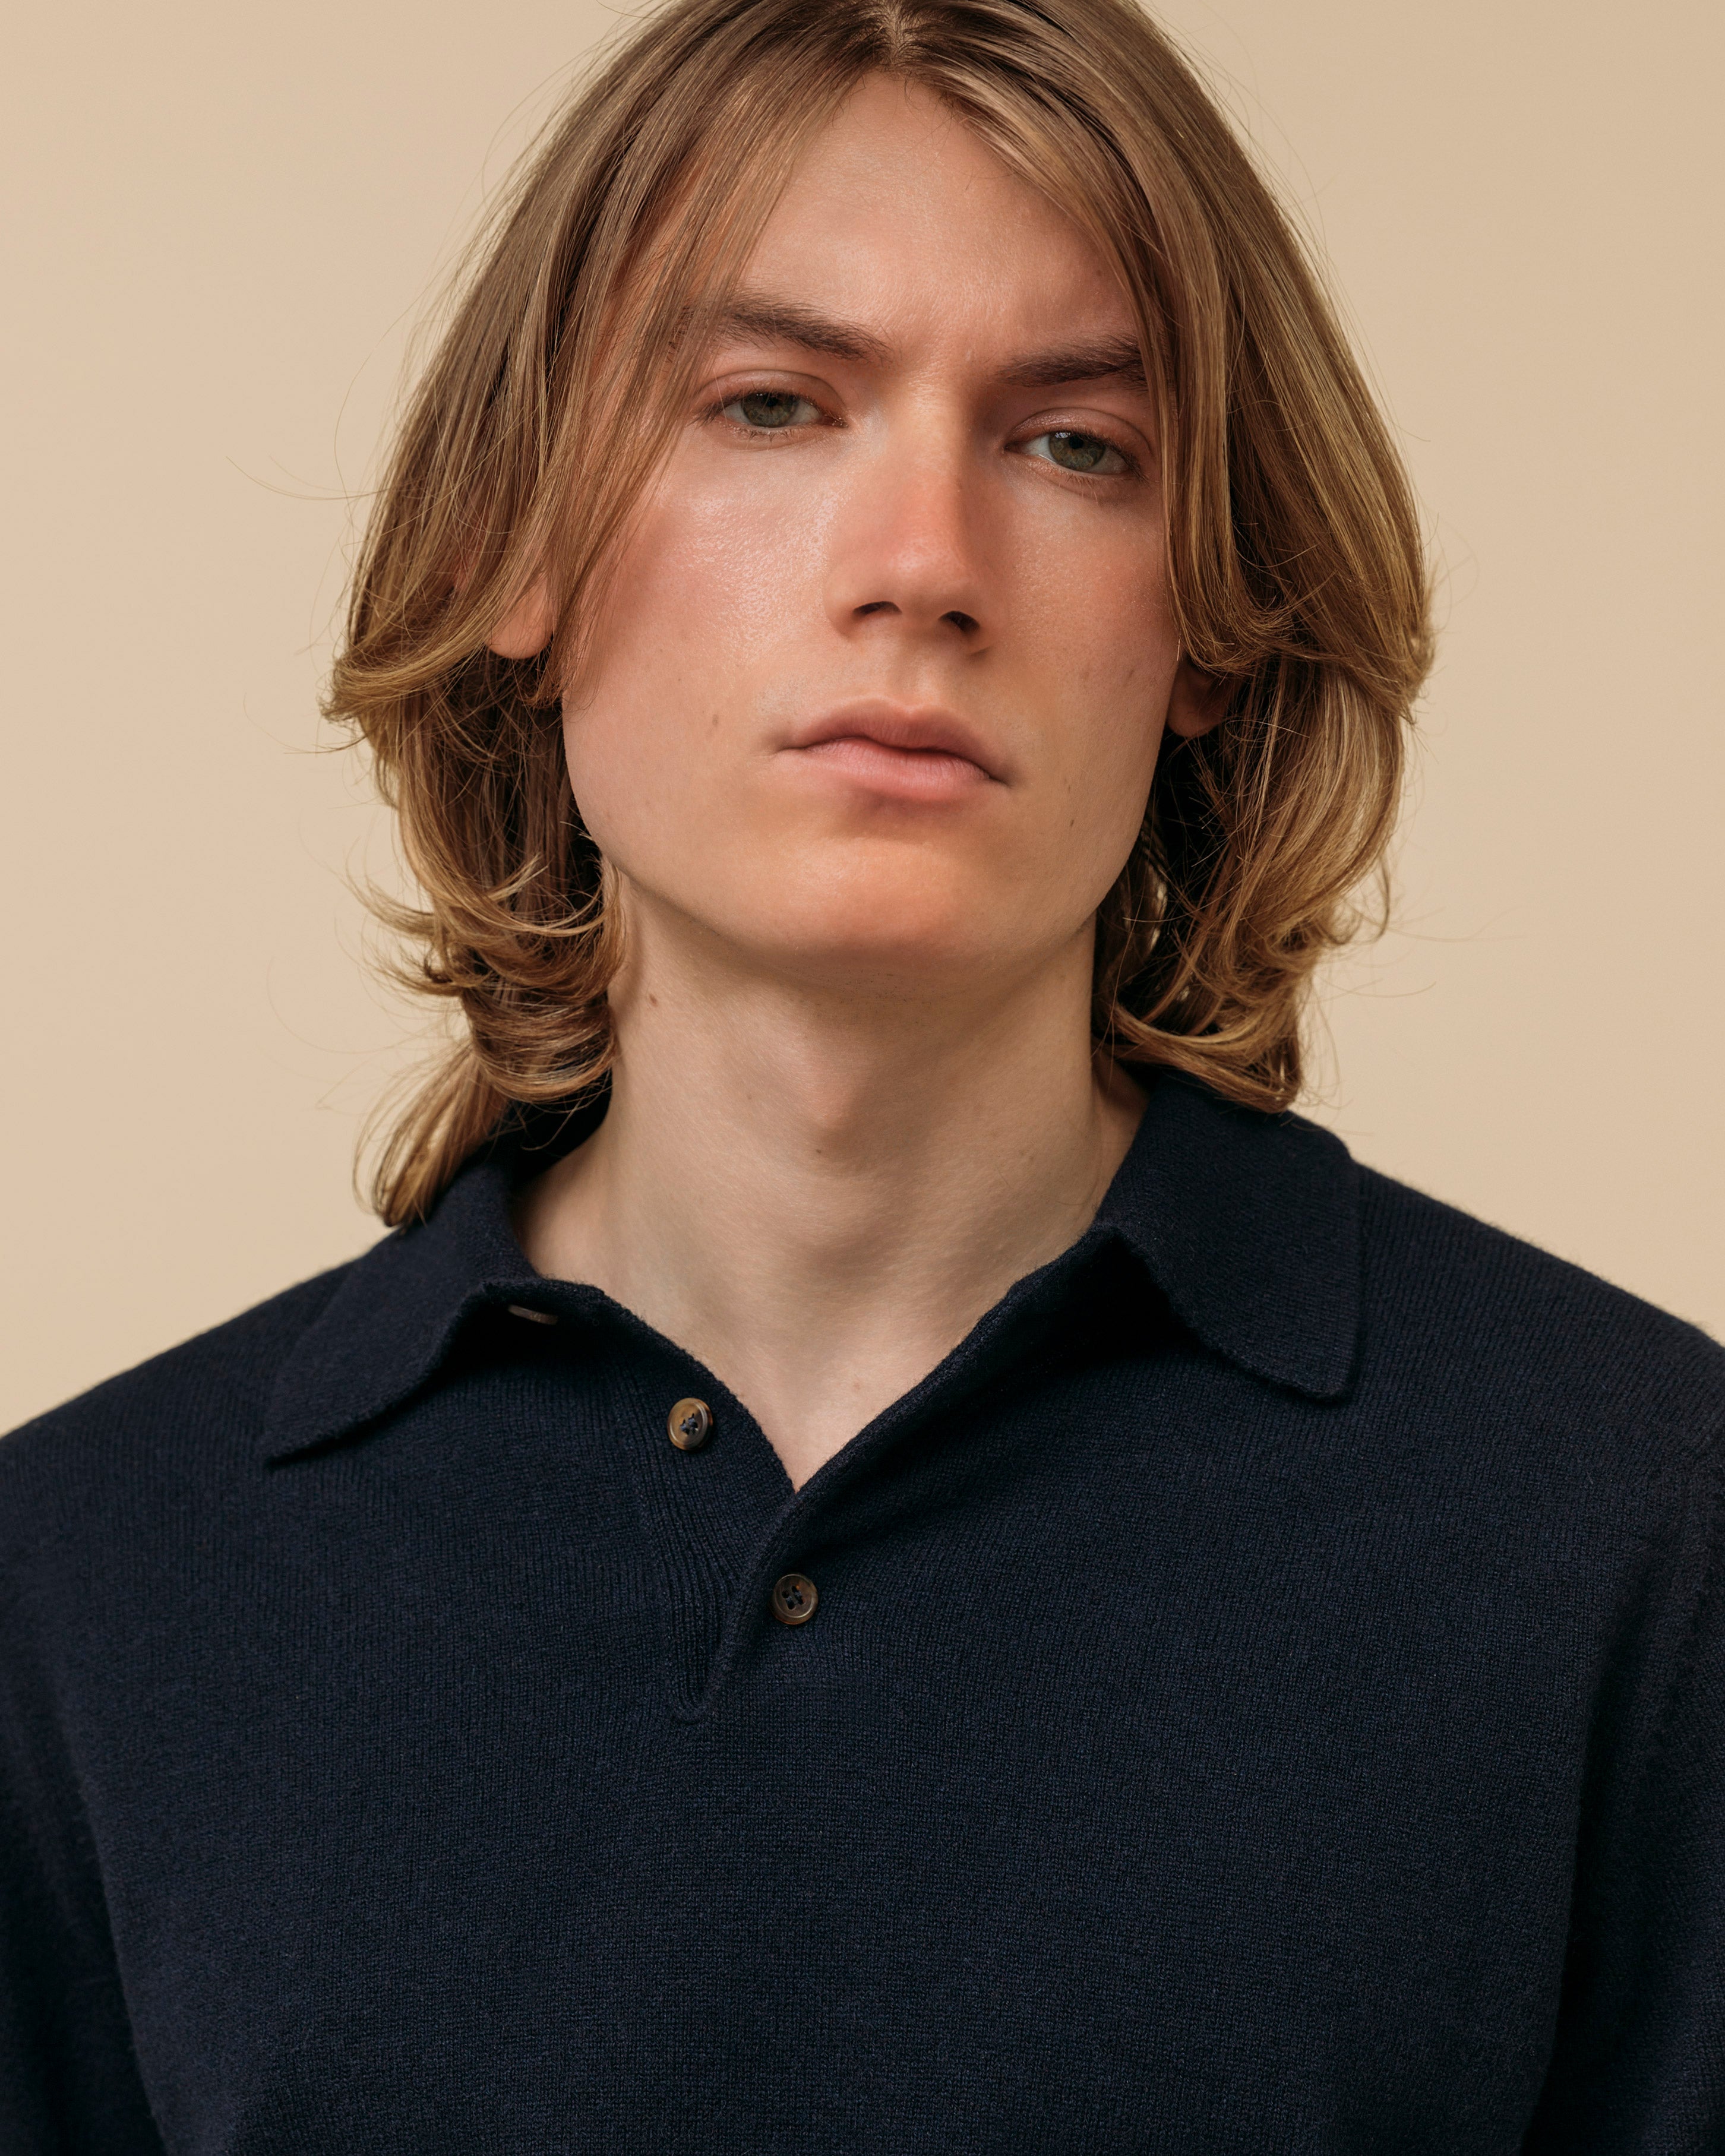 Cashmere polo shirt in navy